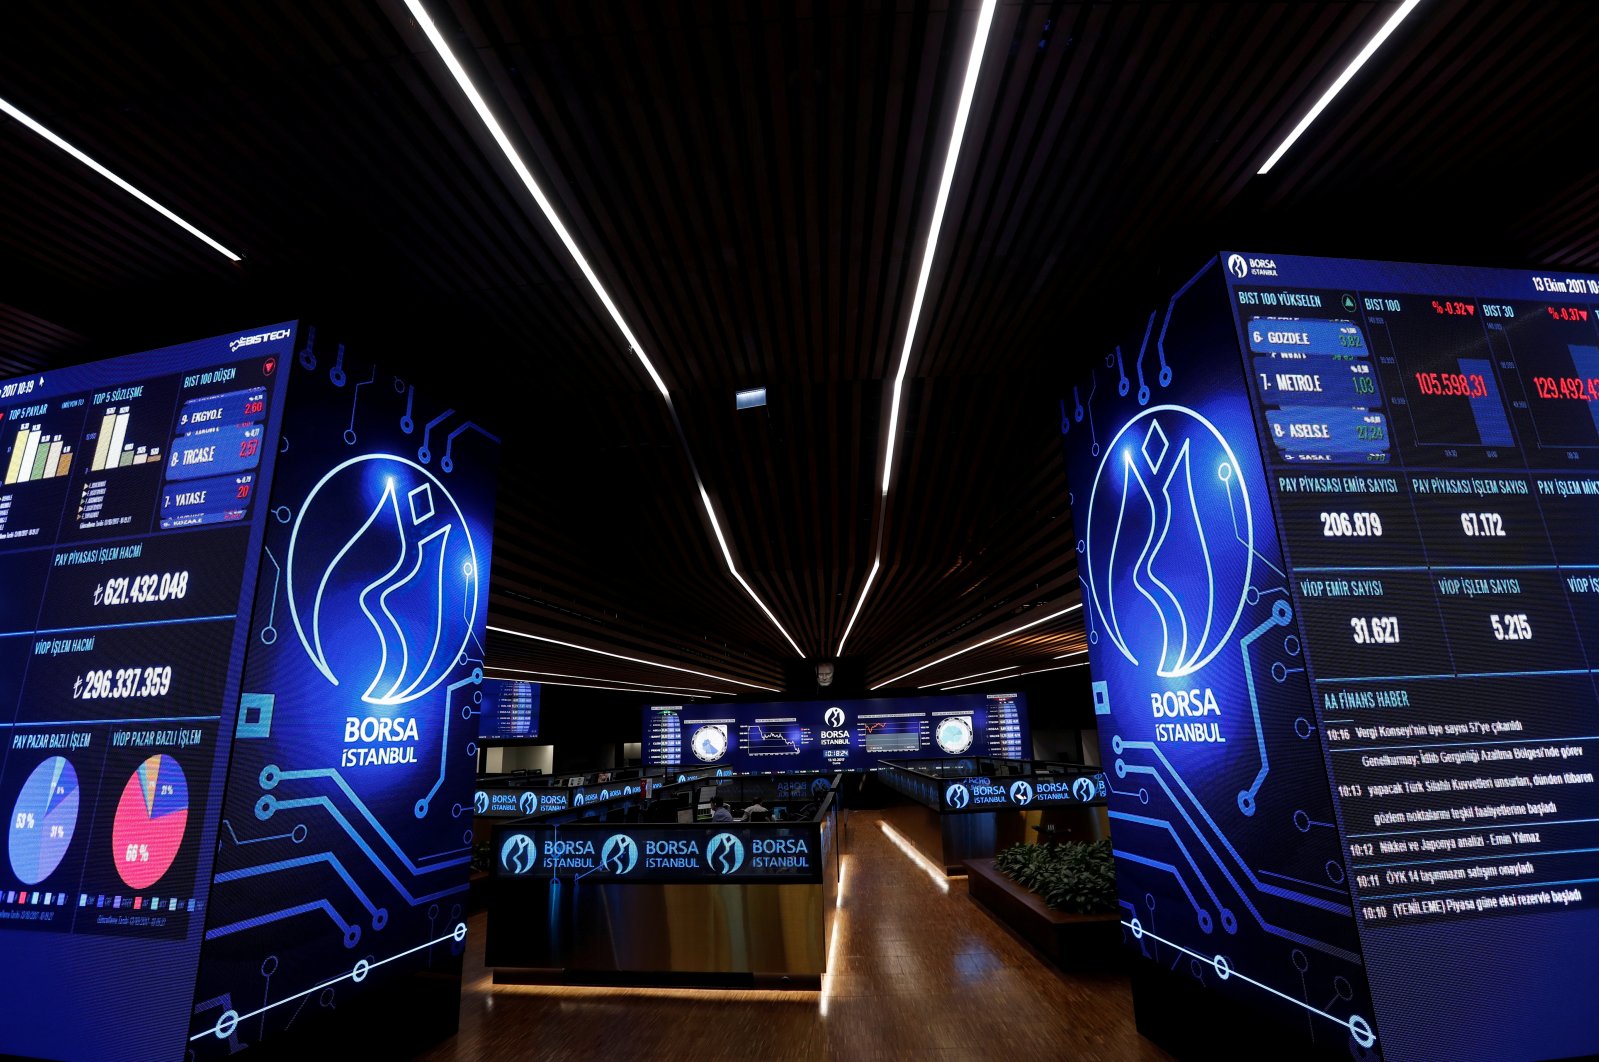 A general view shows the trading floor at the Borsa Istanbul in Istanbul, Turkey, Oct. 13, 2017. (Reuters Photo)